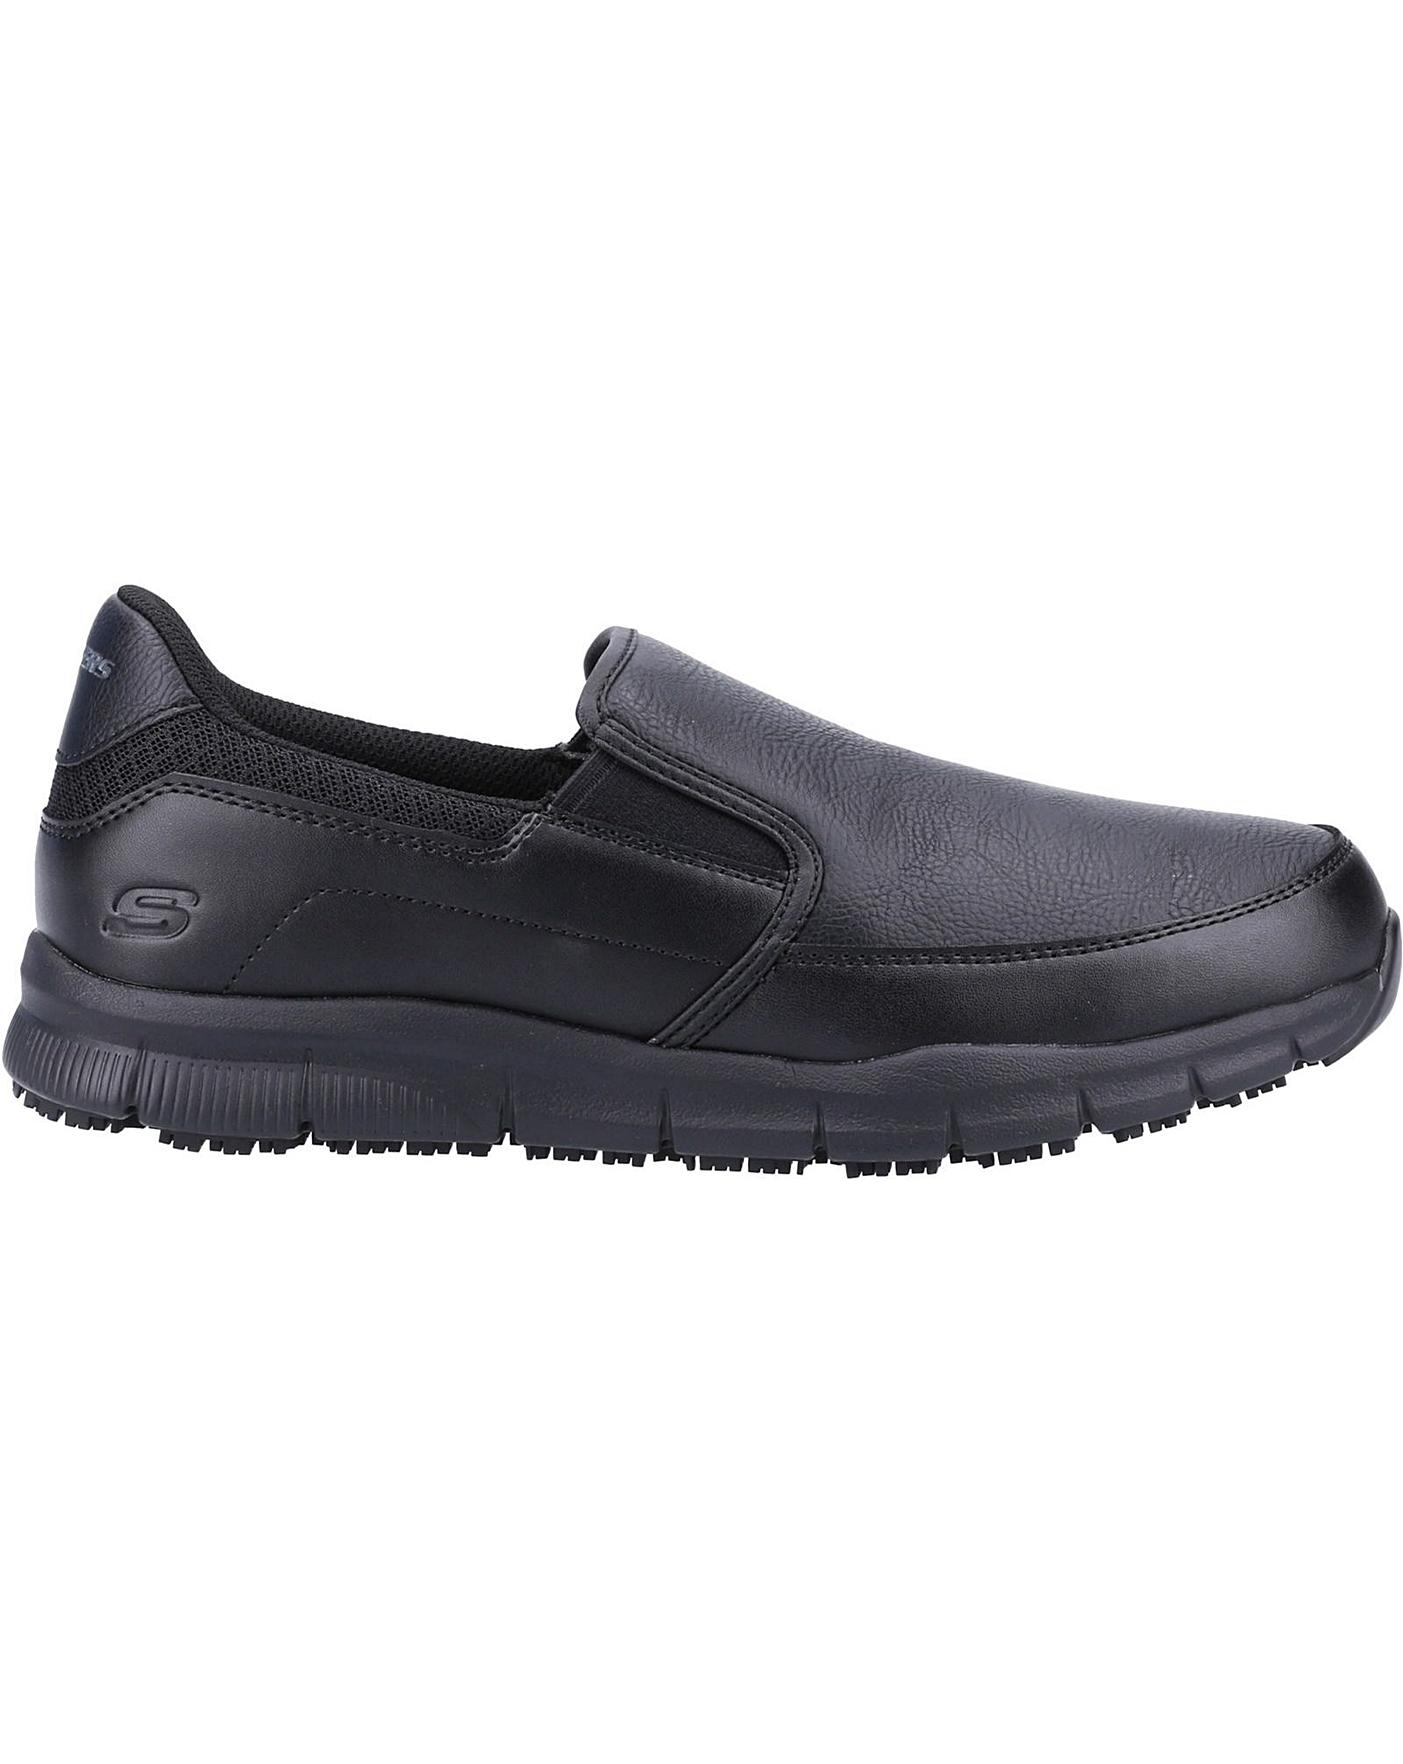 Nampa Groton Occupational Shoes